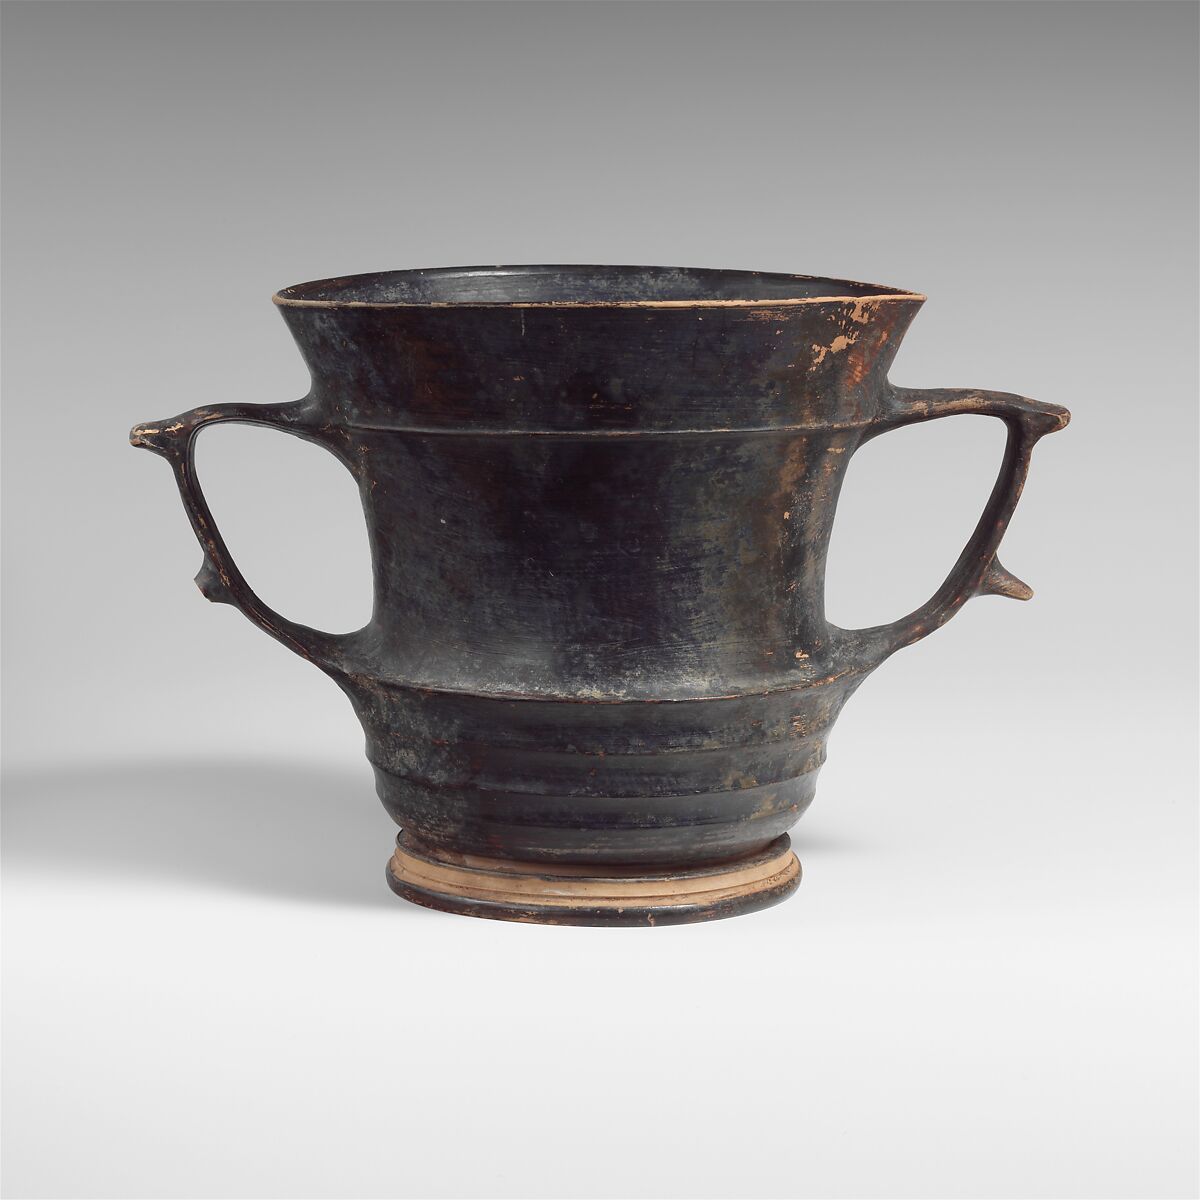 Terracotta kantharos: karchesion (deep cylindrical drinking cup), Terracotta, Greek, Boeotian 